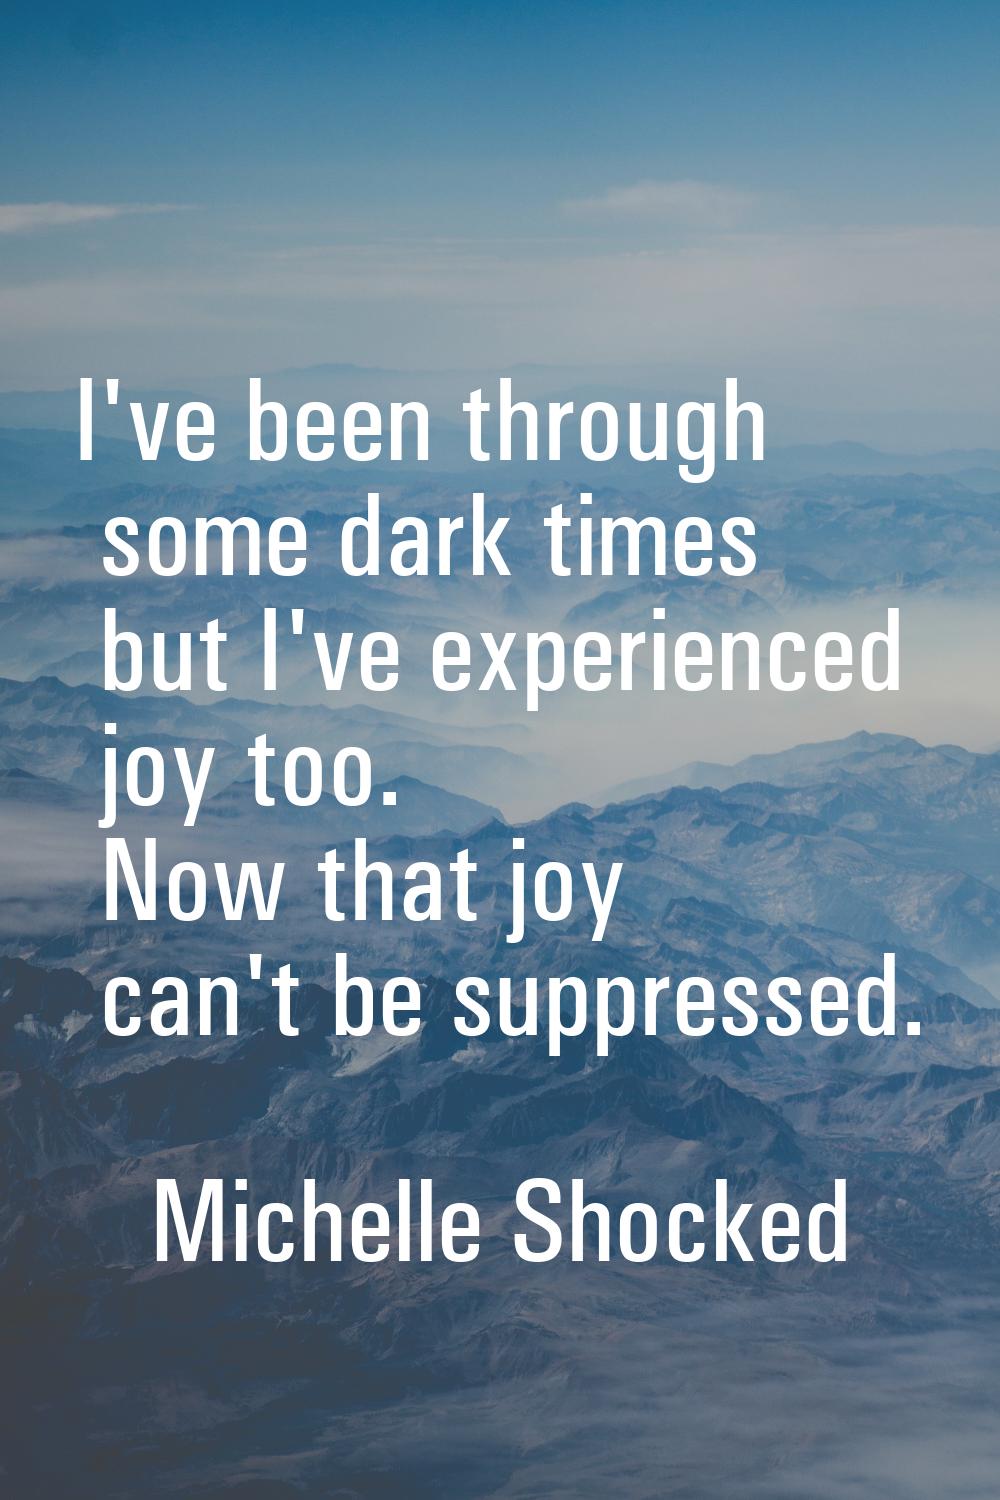 I've been through some dark times but I've experienced joy too. Now that joy can't be suppressed.